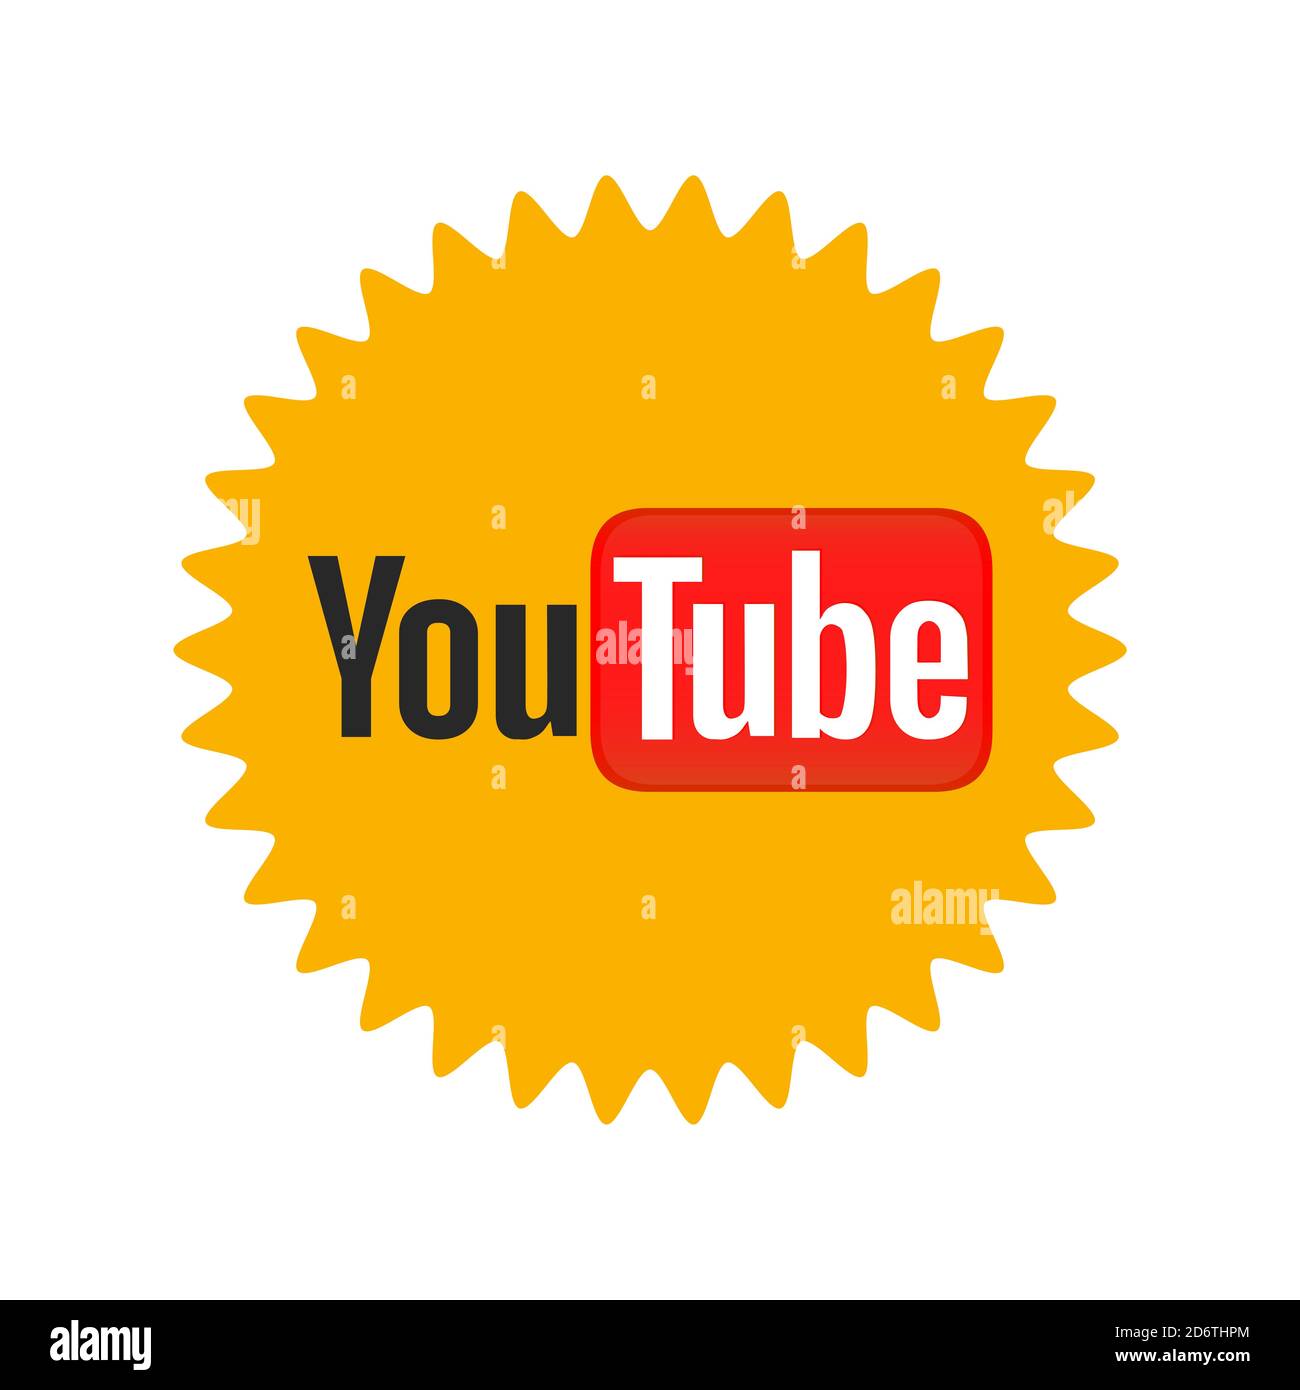 YouTube logo. YouTube is a video-sharing website headquartered in ...